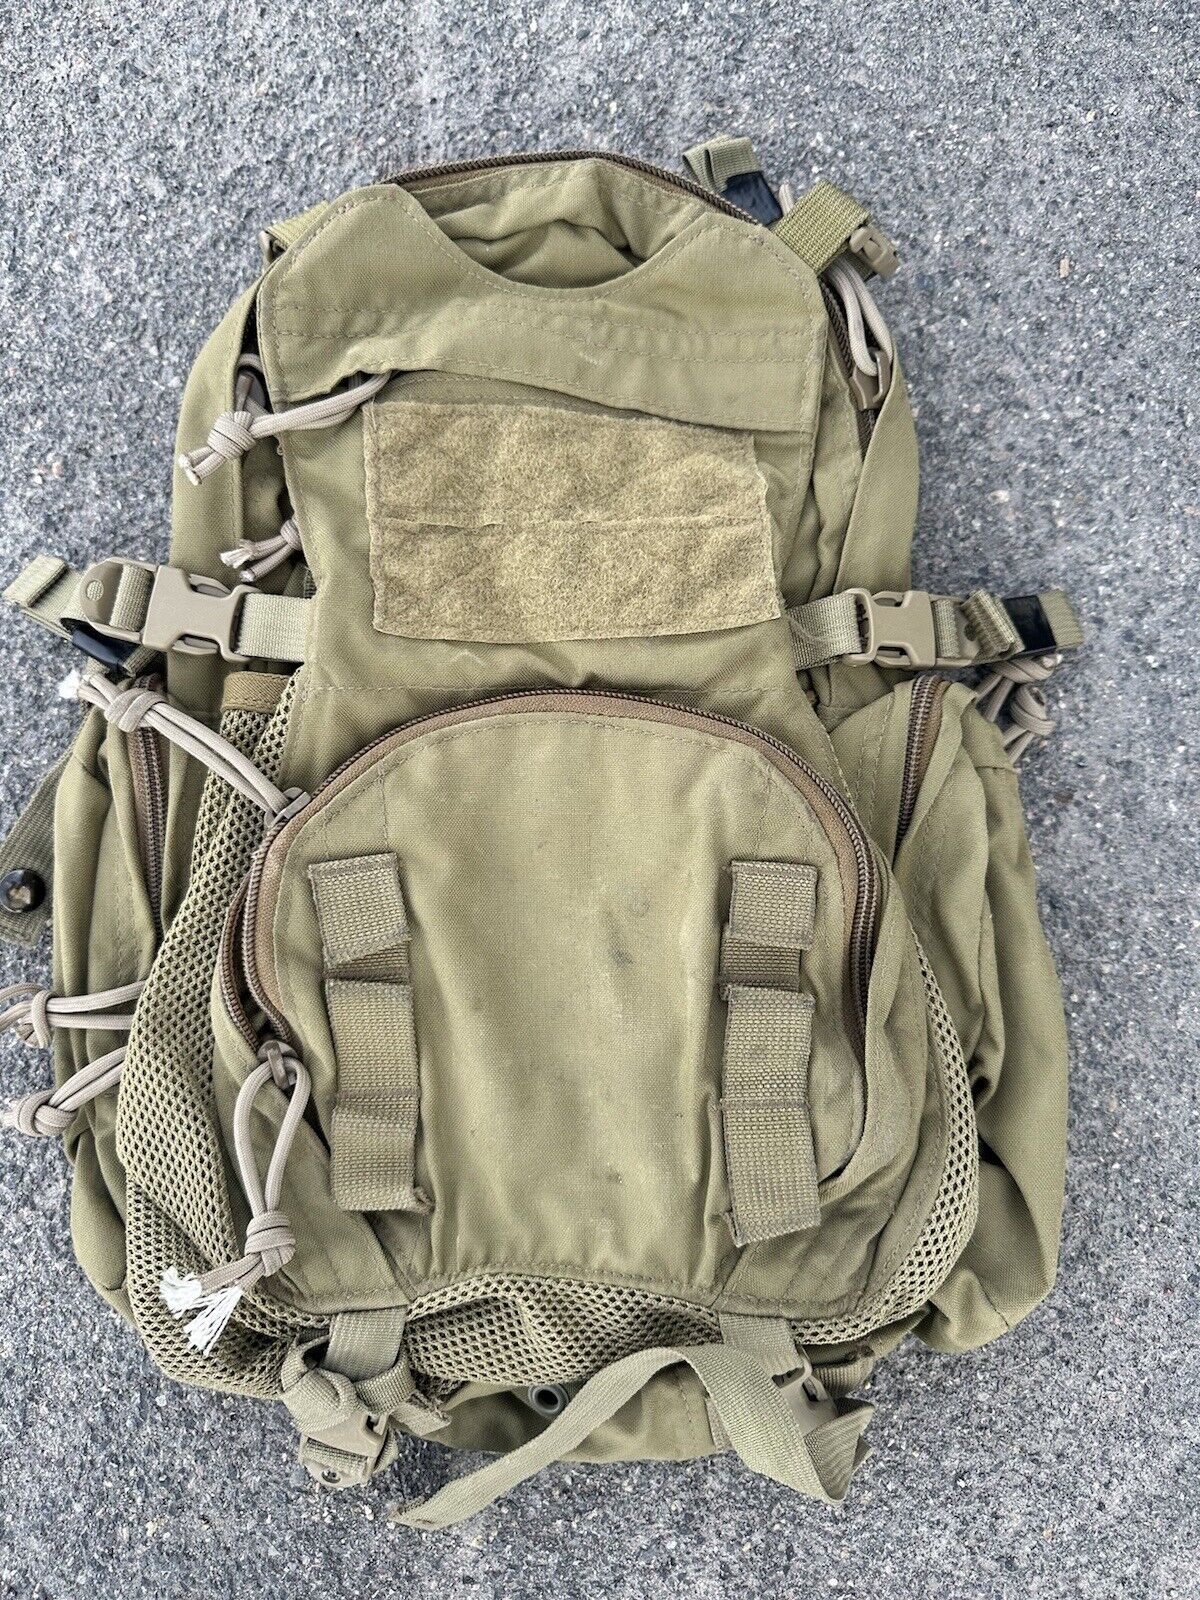 Eagle Industries BTAP Beaver Tail Assault Pack Yote Backpack